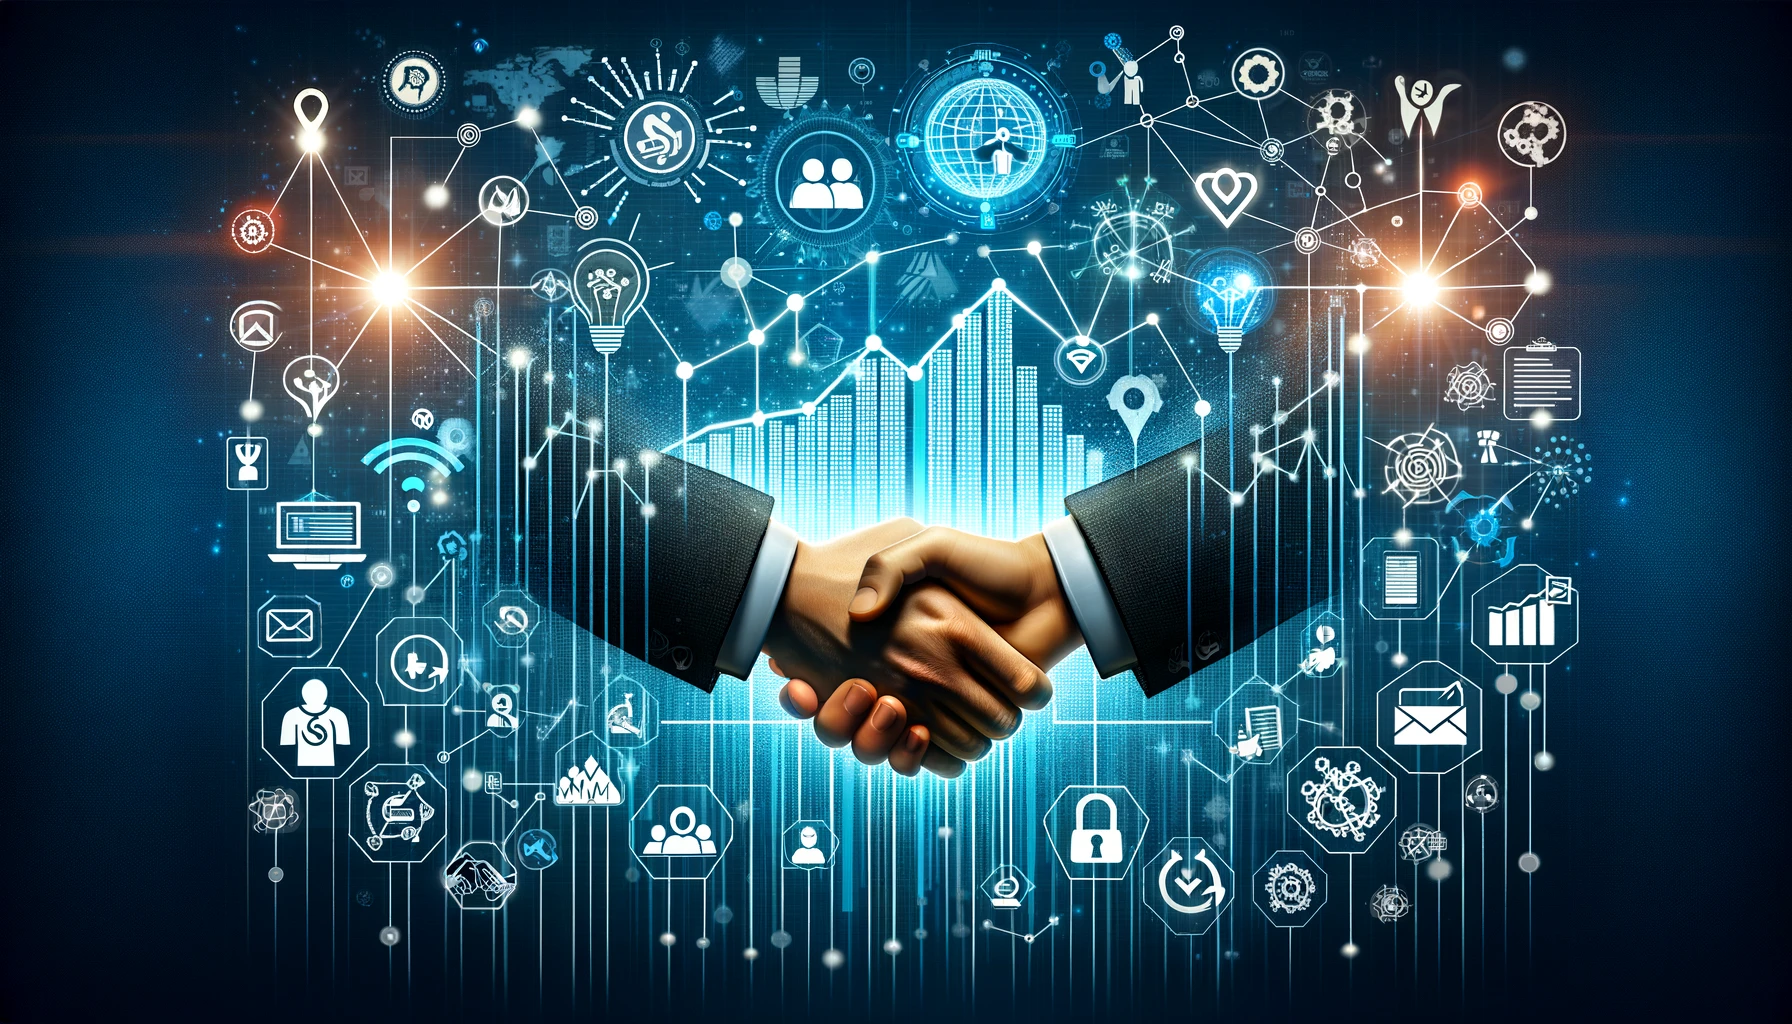 An illustration showcasing symbols of partnership, growth, and connectivity in affiliate program management, including handshake icons, upward graphs, and digital networks.